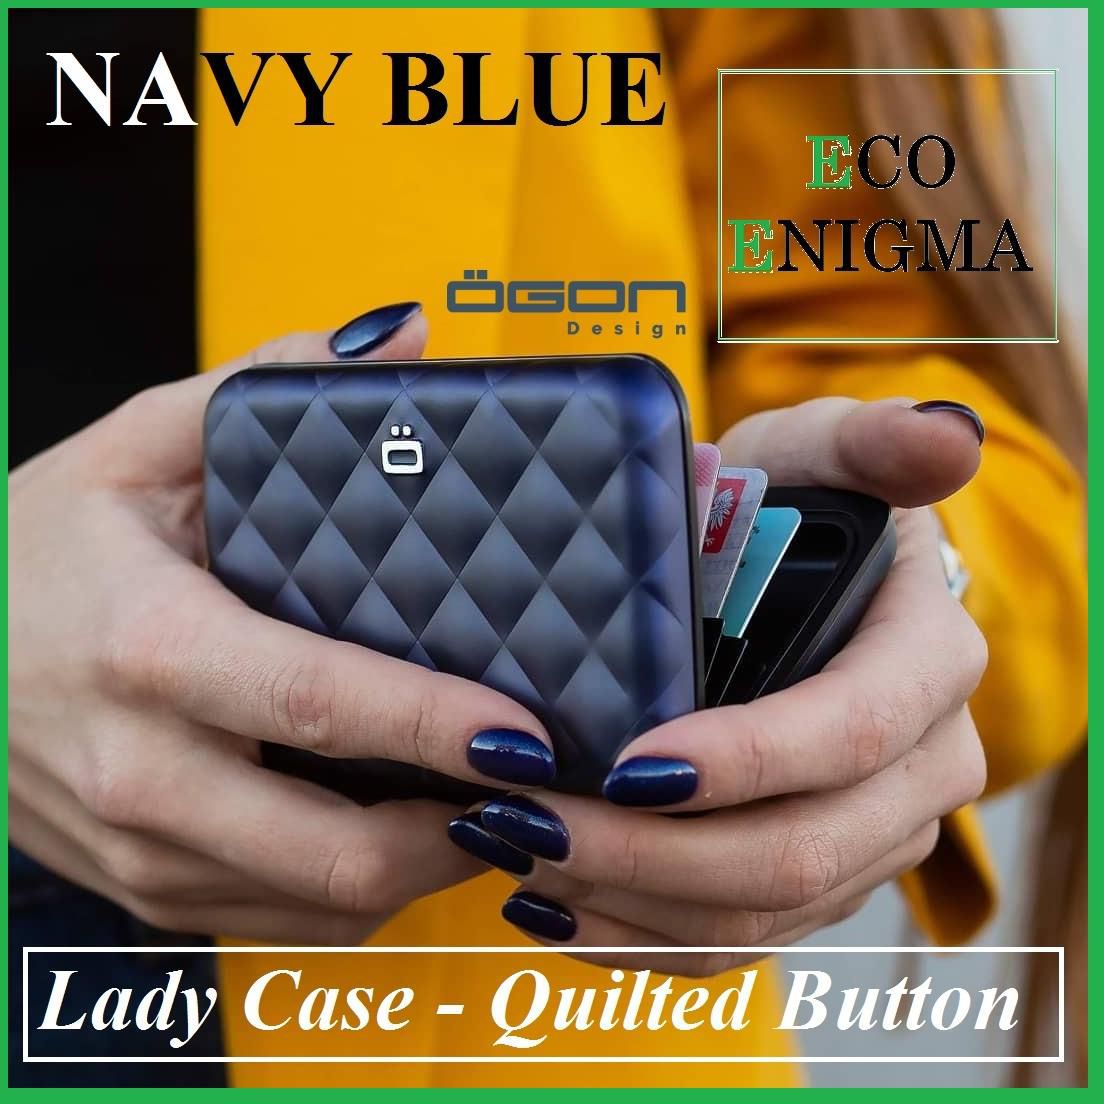 OGON DESIGN Lady Case Quilted Button Wallet Theft Proof RFID Safe (Navy Blue)